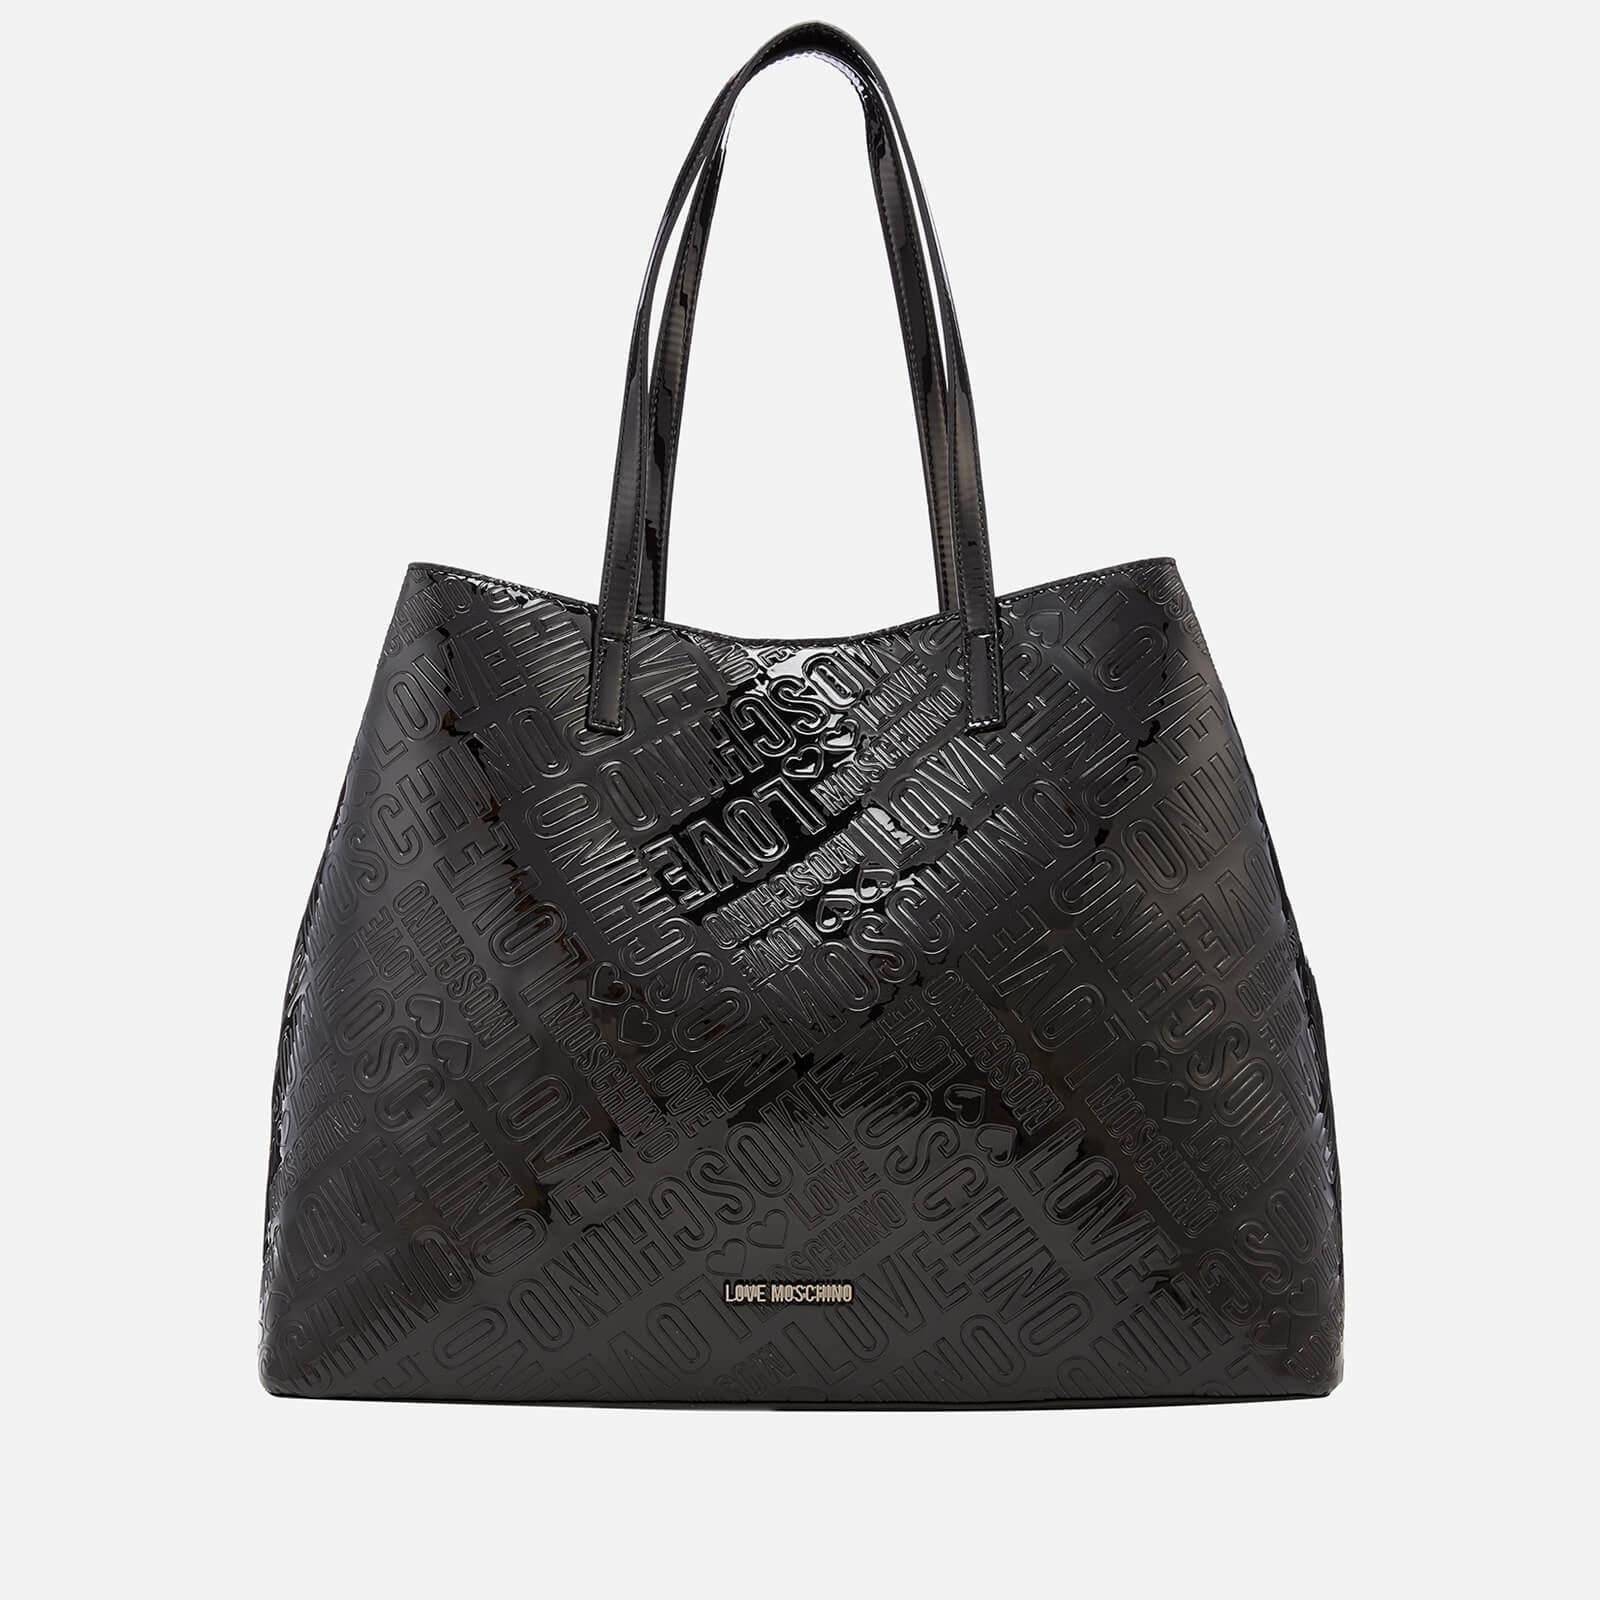 love moschino embossed tote bag